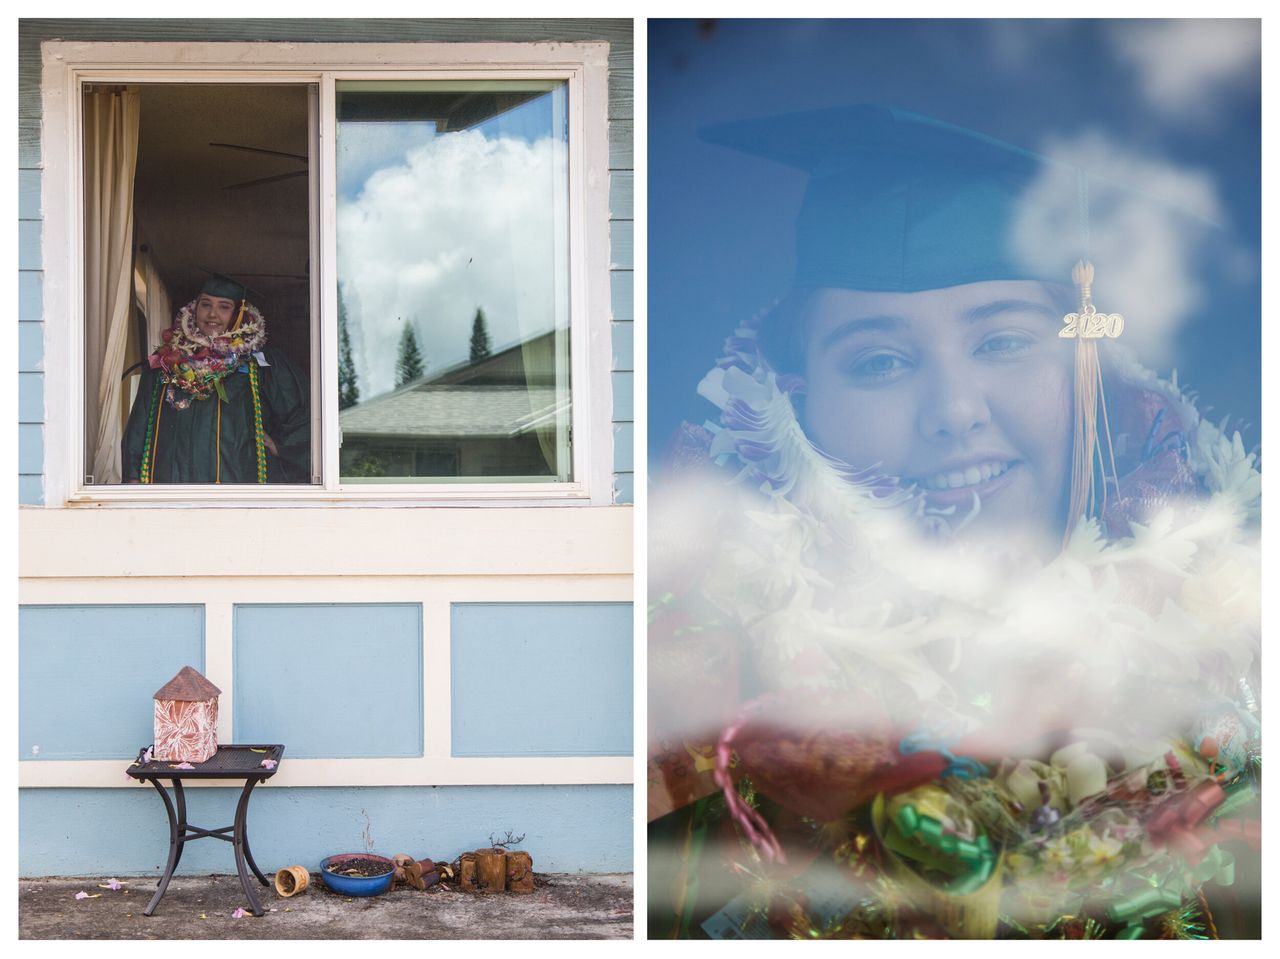 Asha Silva, a Leilehua High School graduate, shows off her colorful leis at her home in Mililani, Hawaii, on May 23.